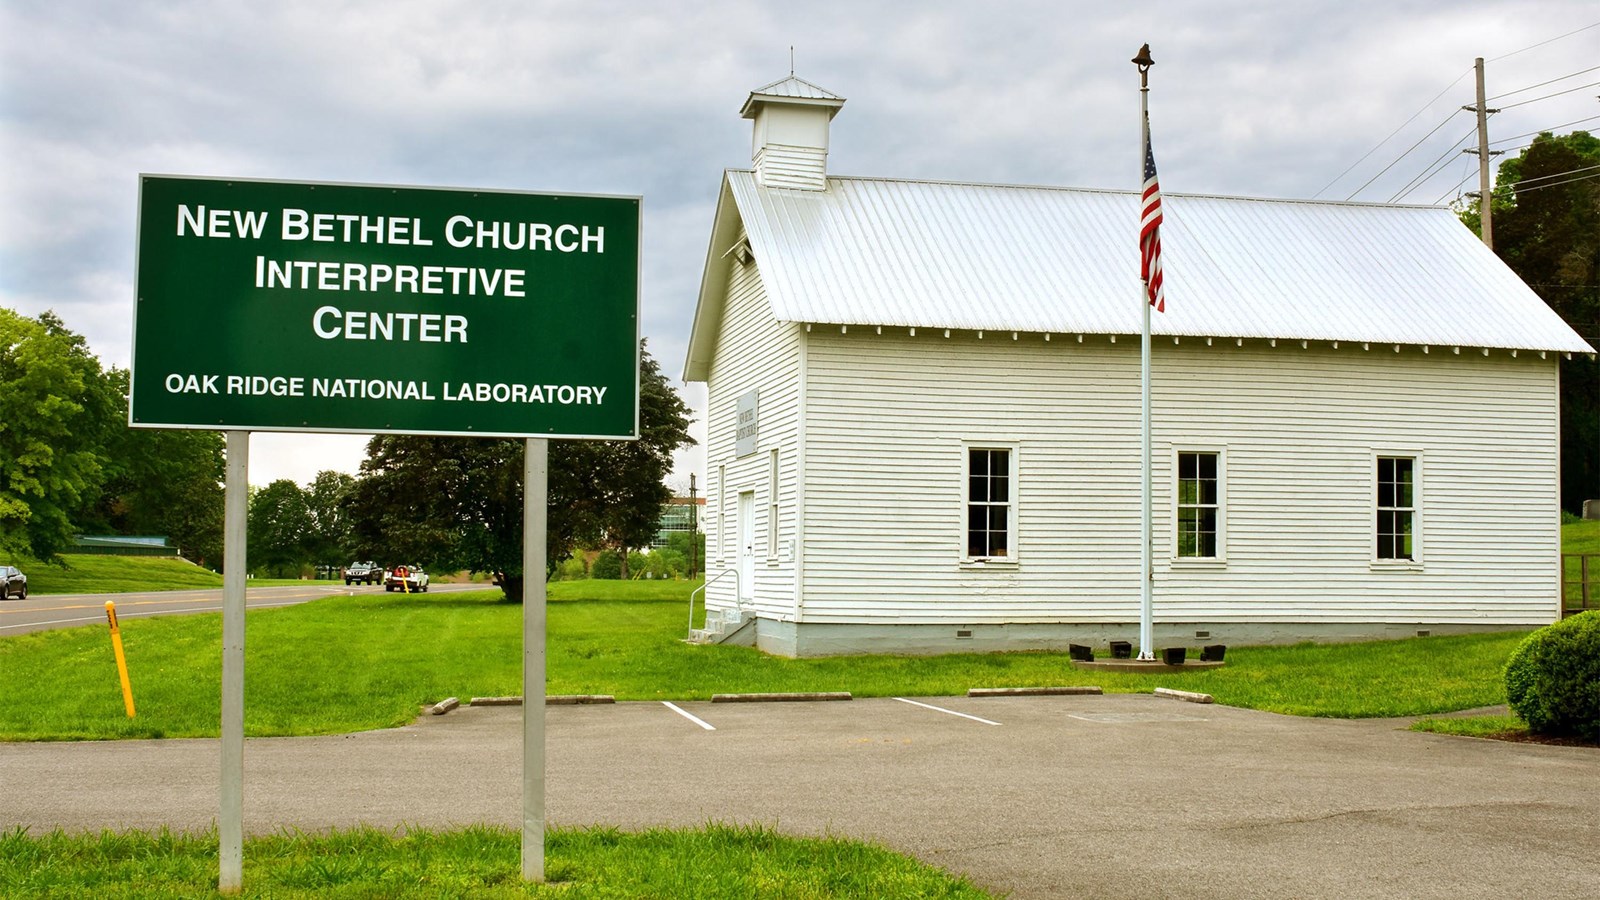 A small white church with a sign that reads “New Bethel Interpretive Center”.